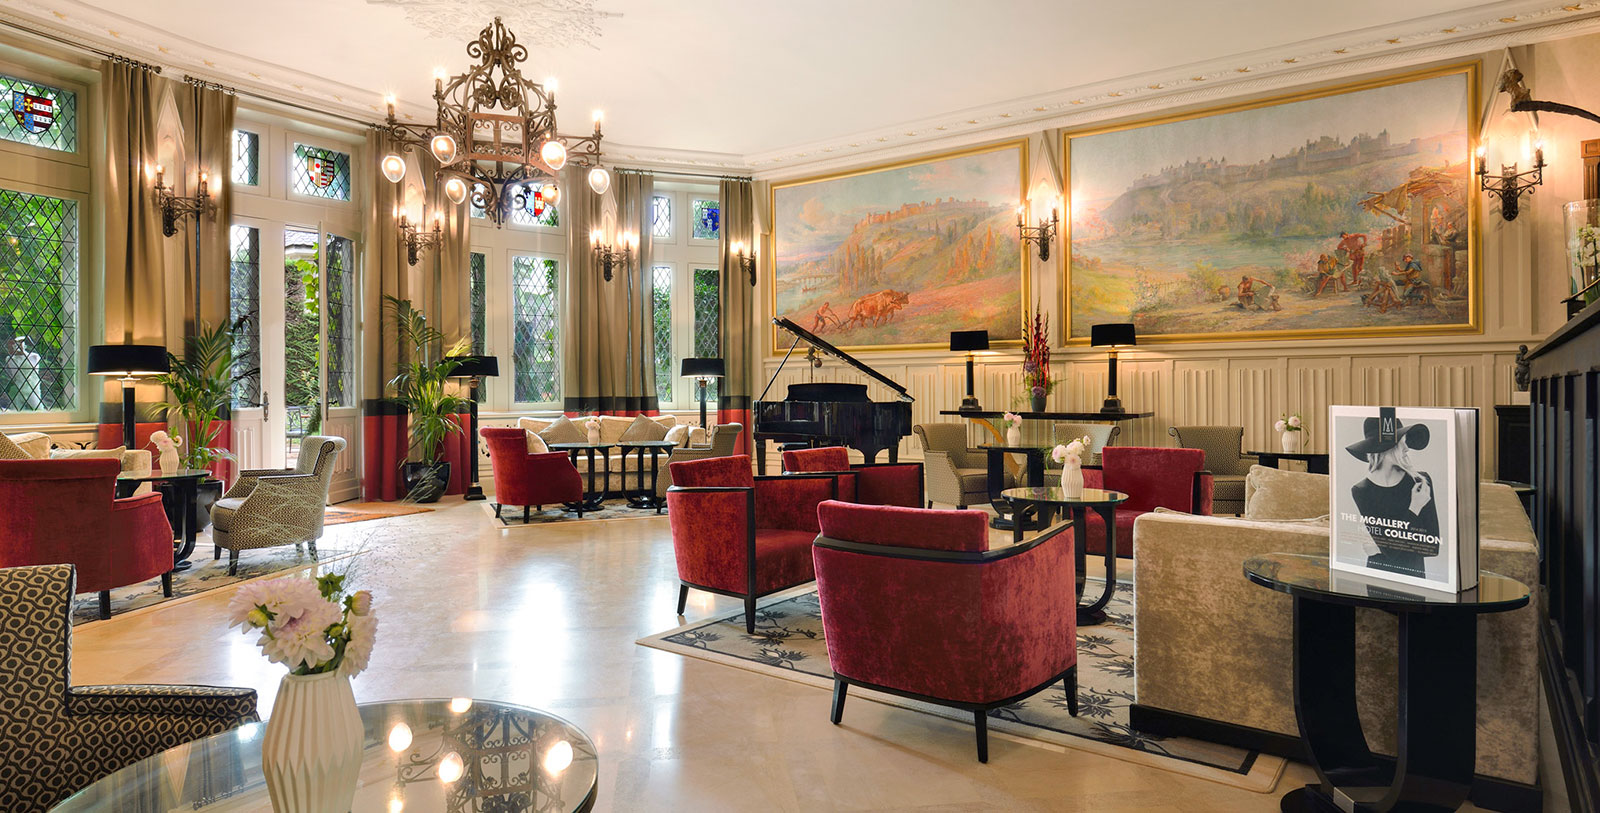 Image of Lobby at Hôtel de la Cité Carcassonne - MGallery by Sofitel, 1909, Member of Historic Hotels Worldwide, in Carcassonne, France, Explore